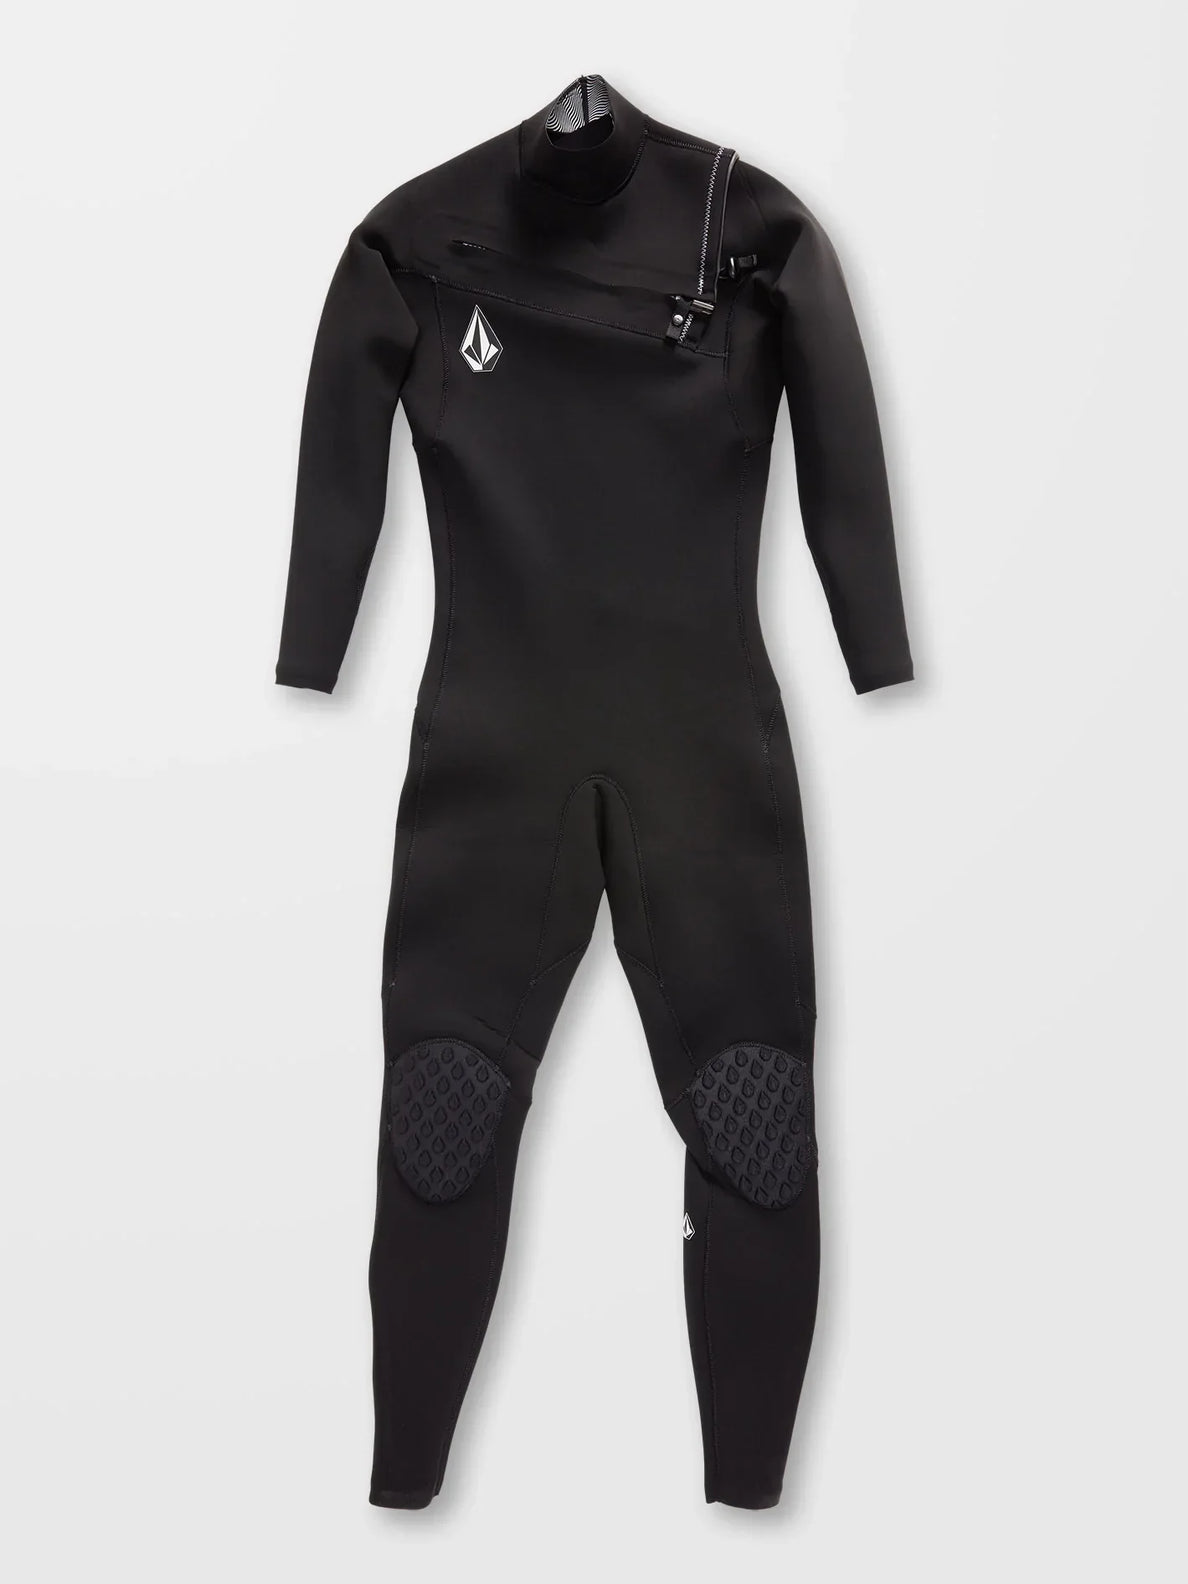 2/2Mm Long Sleeve Full Wetsuit - BLACK (A9532202_BLK) [43]